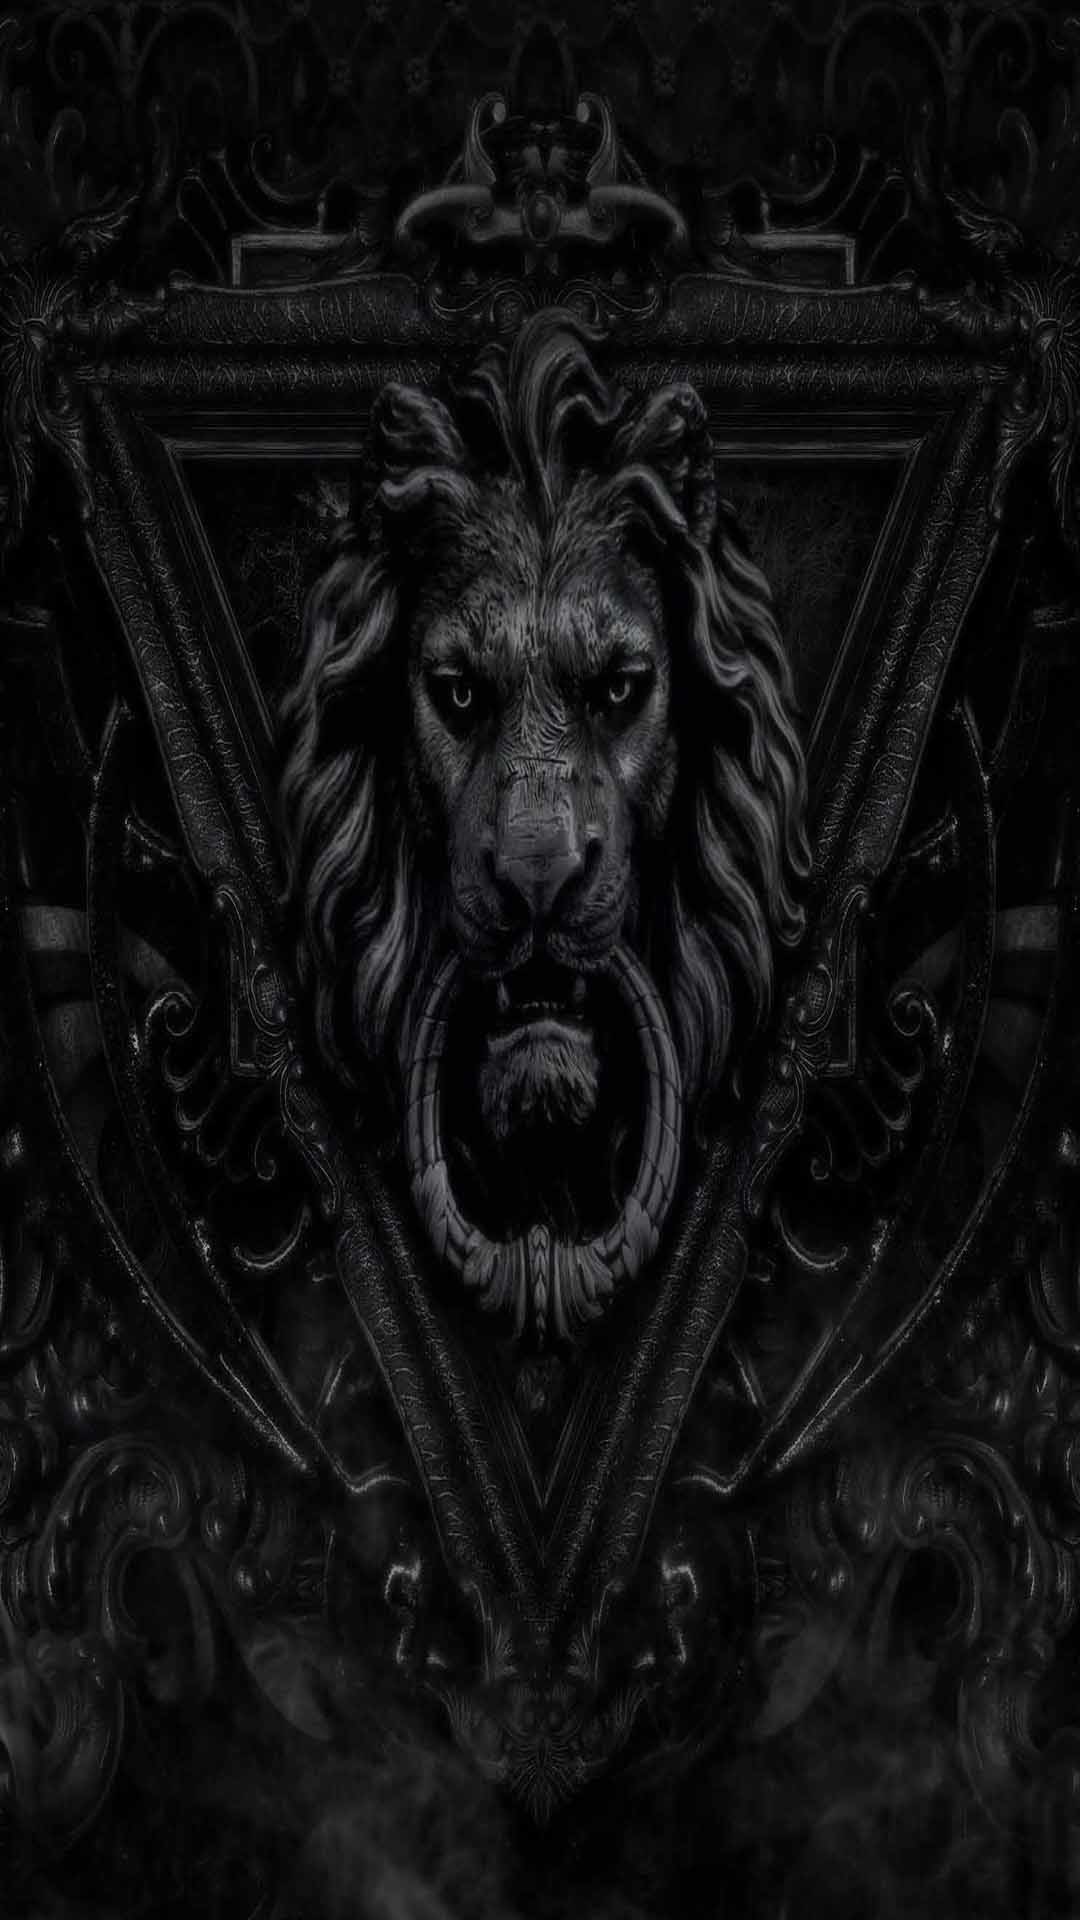 1080x1920 Dark lion iphone 5s full hd wallpapers free download